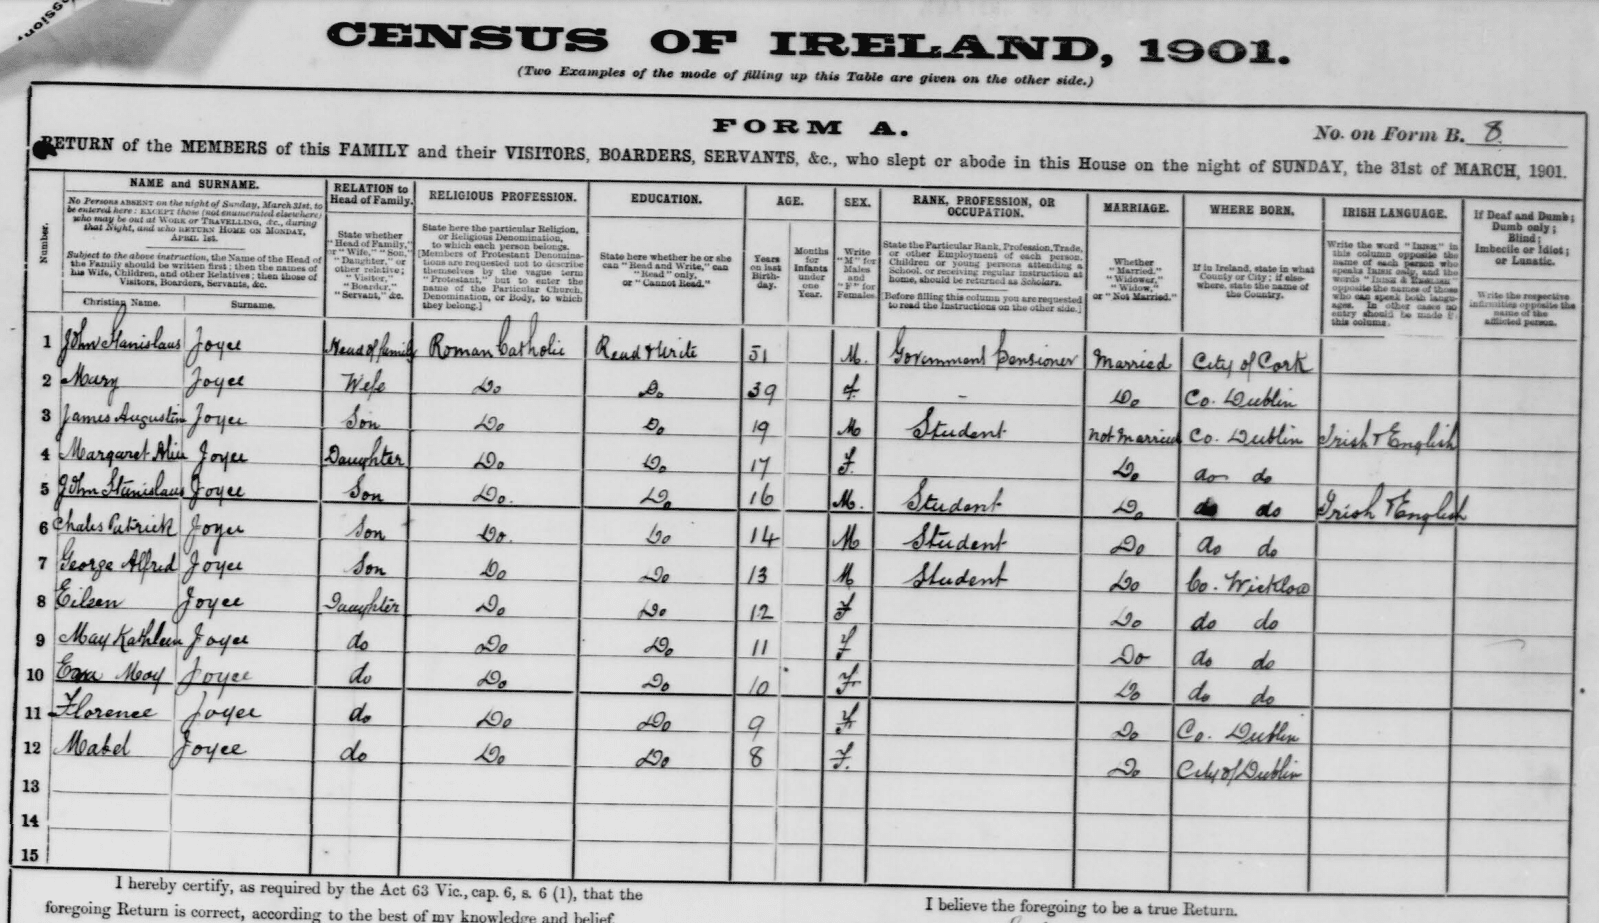 Image of census record of James Joyce [Credit: National Archives of Ireland via MyHeritage]